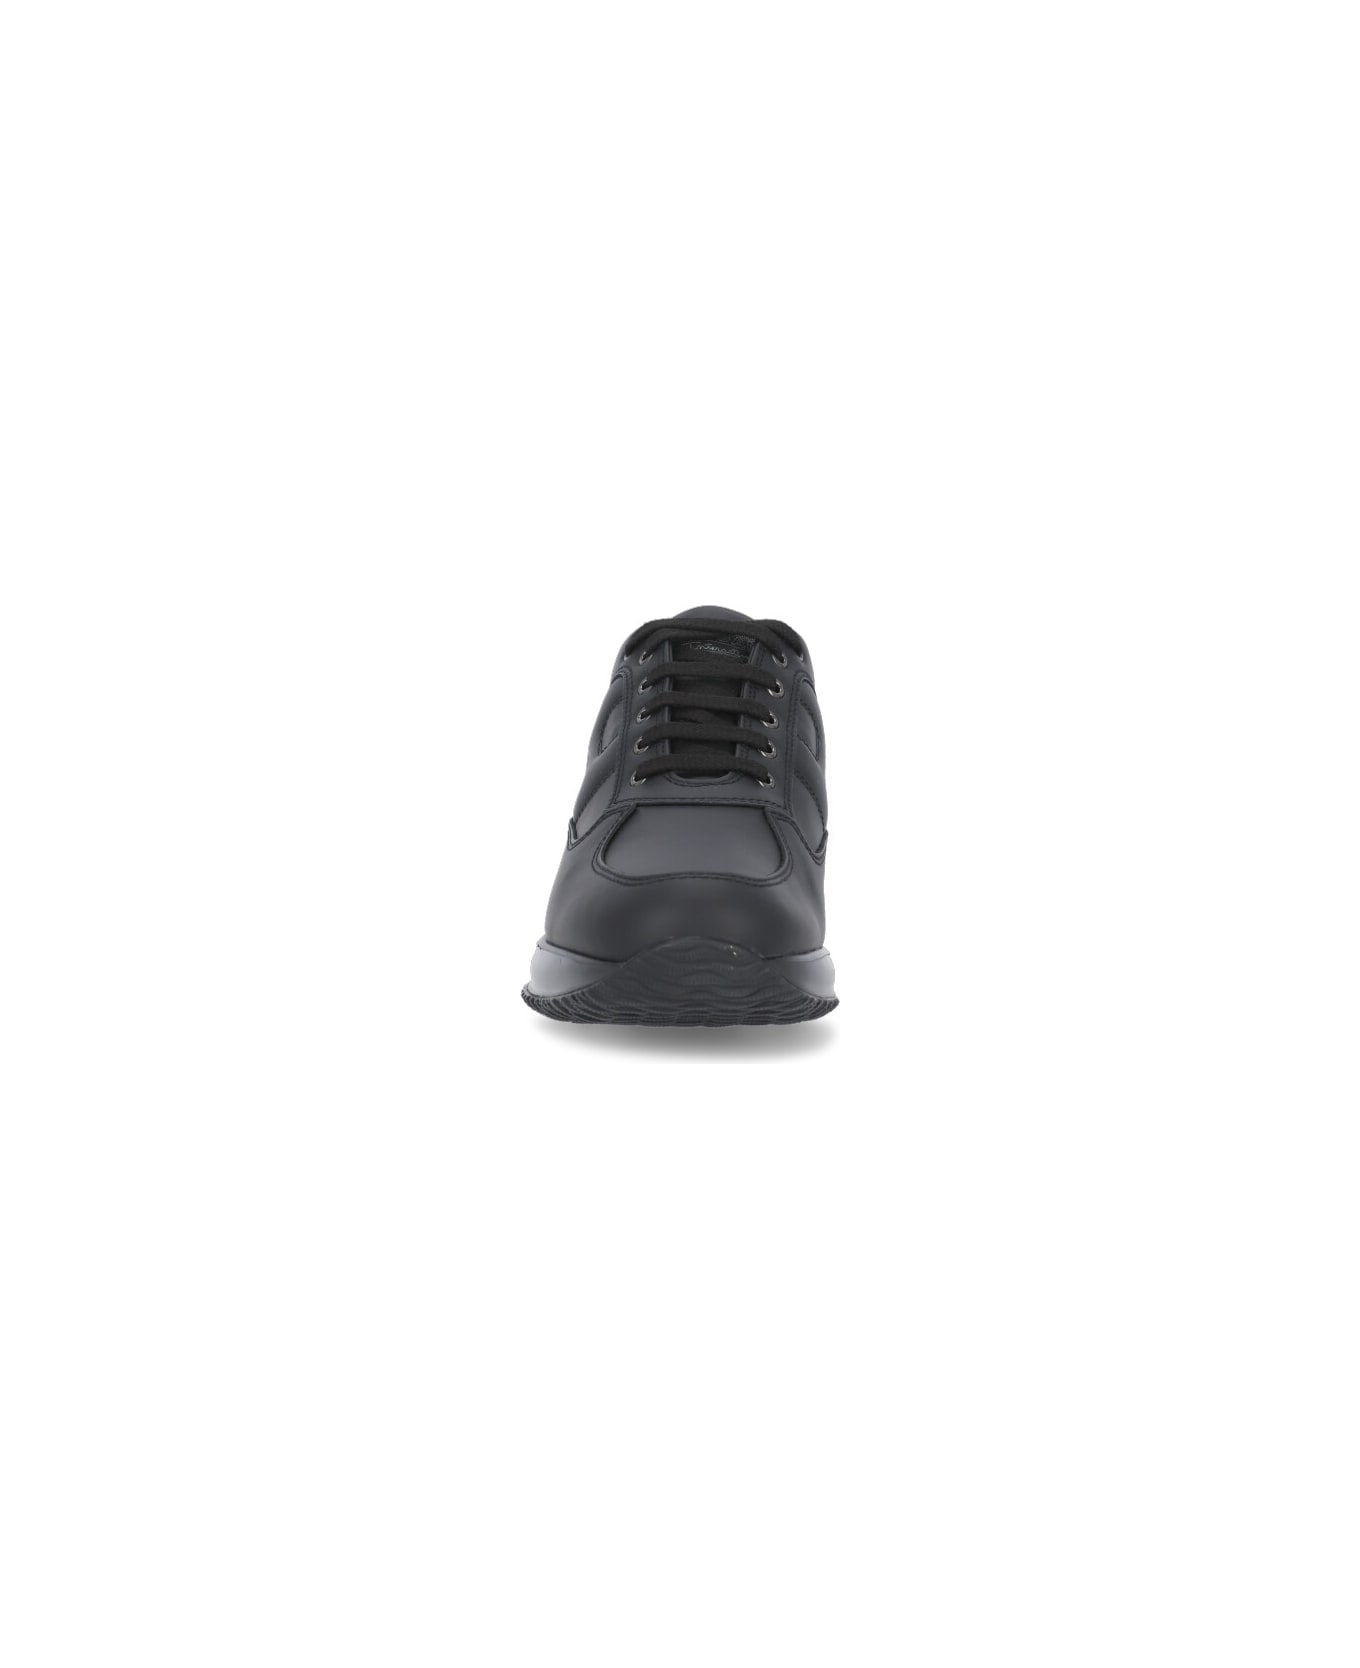 Hogan Interactive Lace-up Sneakers - Black スニーカー